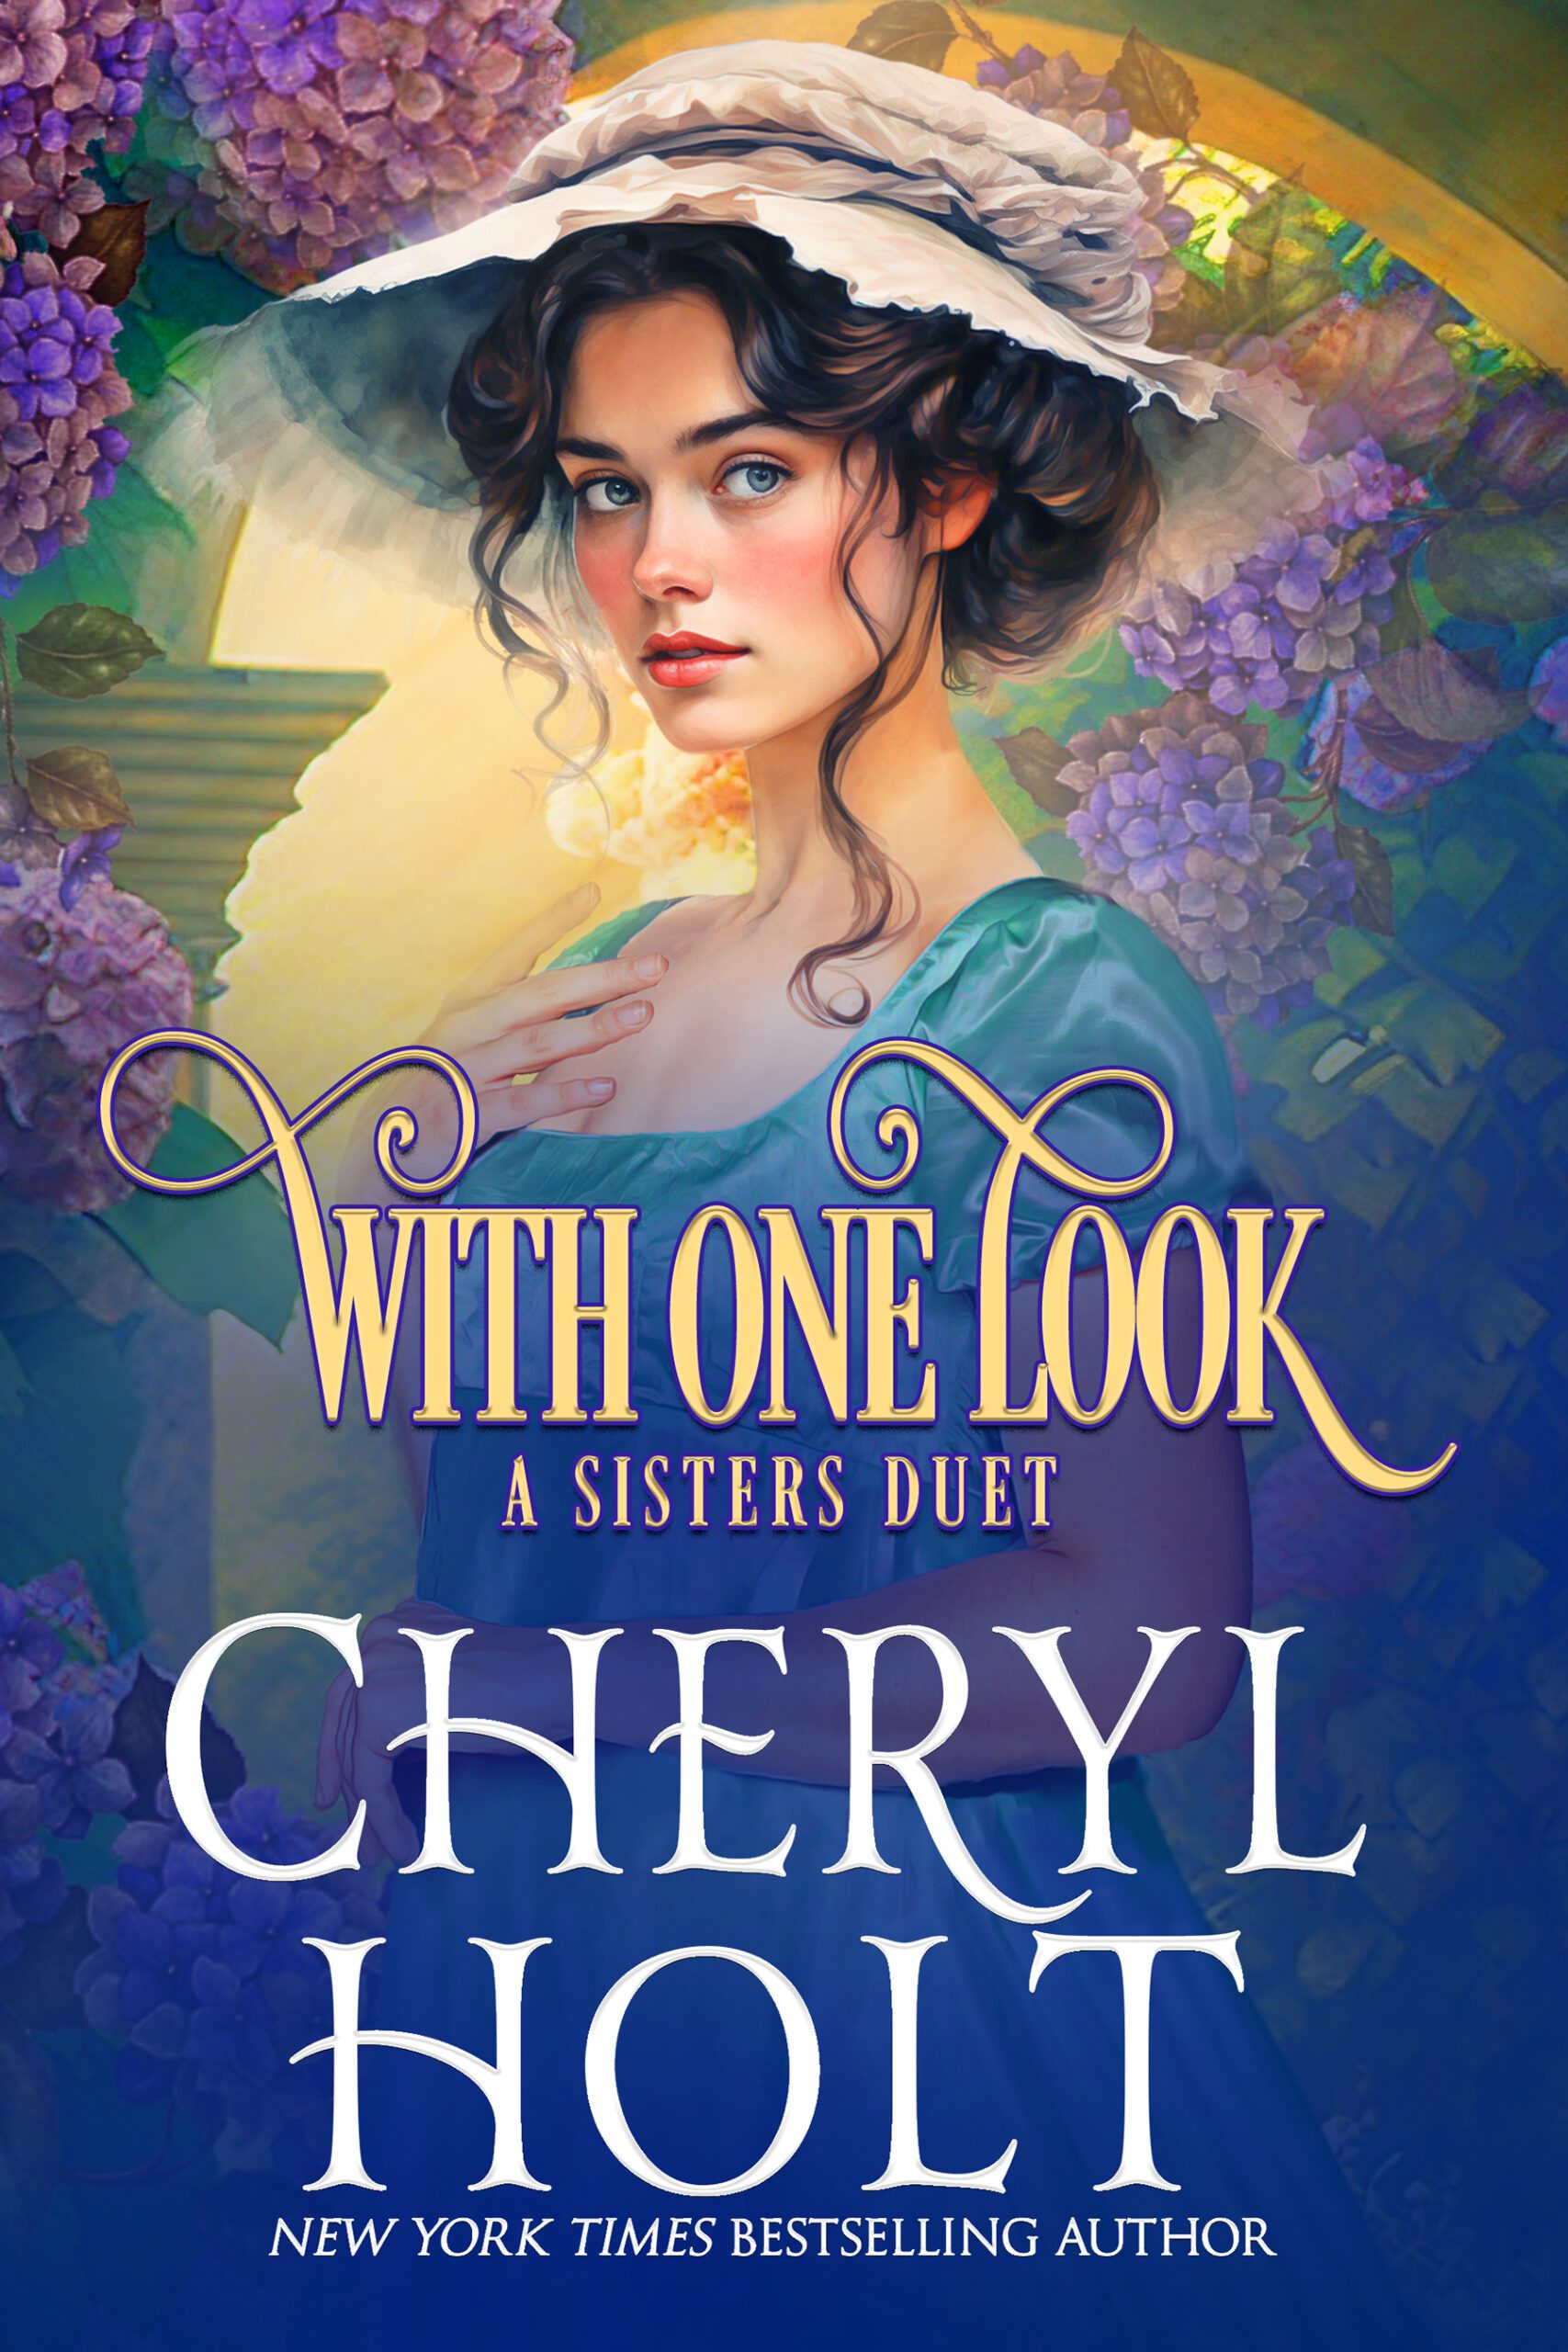 WITH ONE LOOK by Cheryl Holt